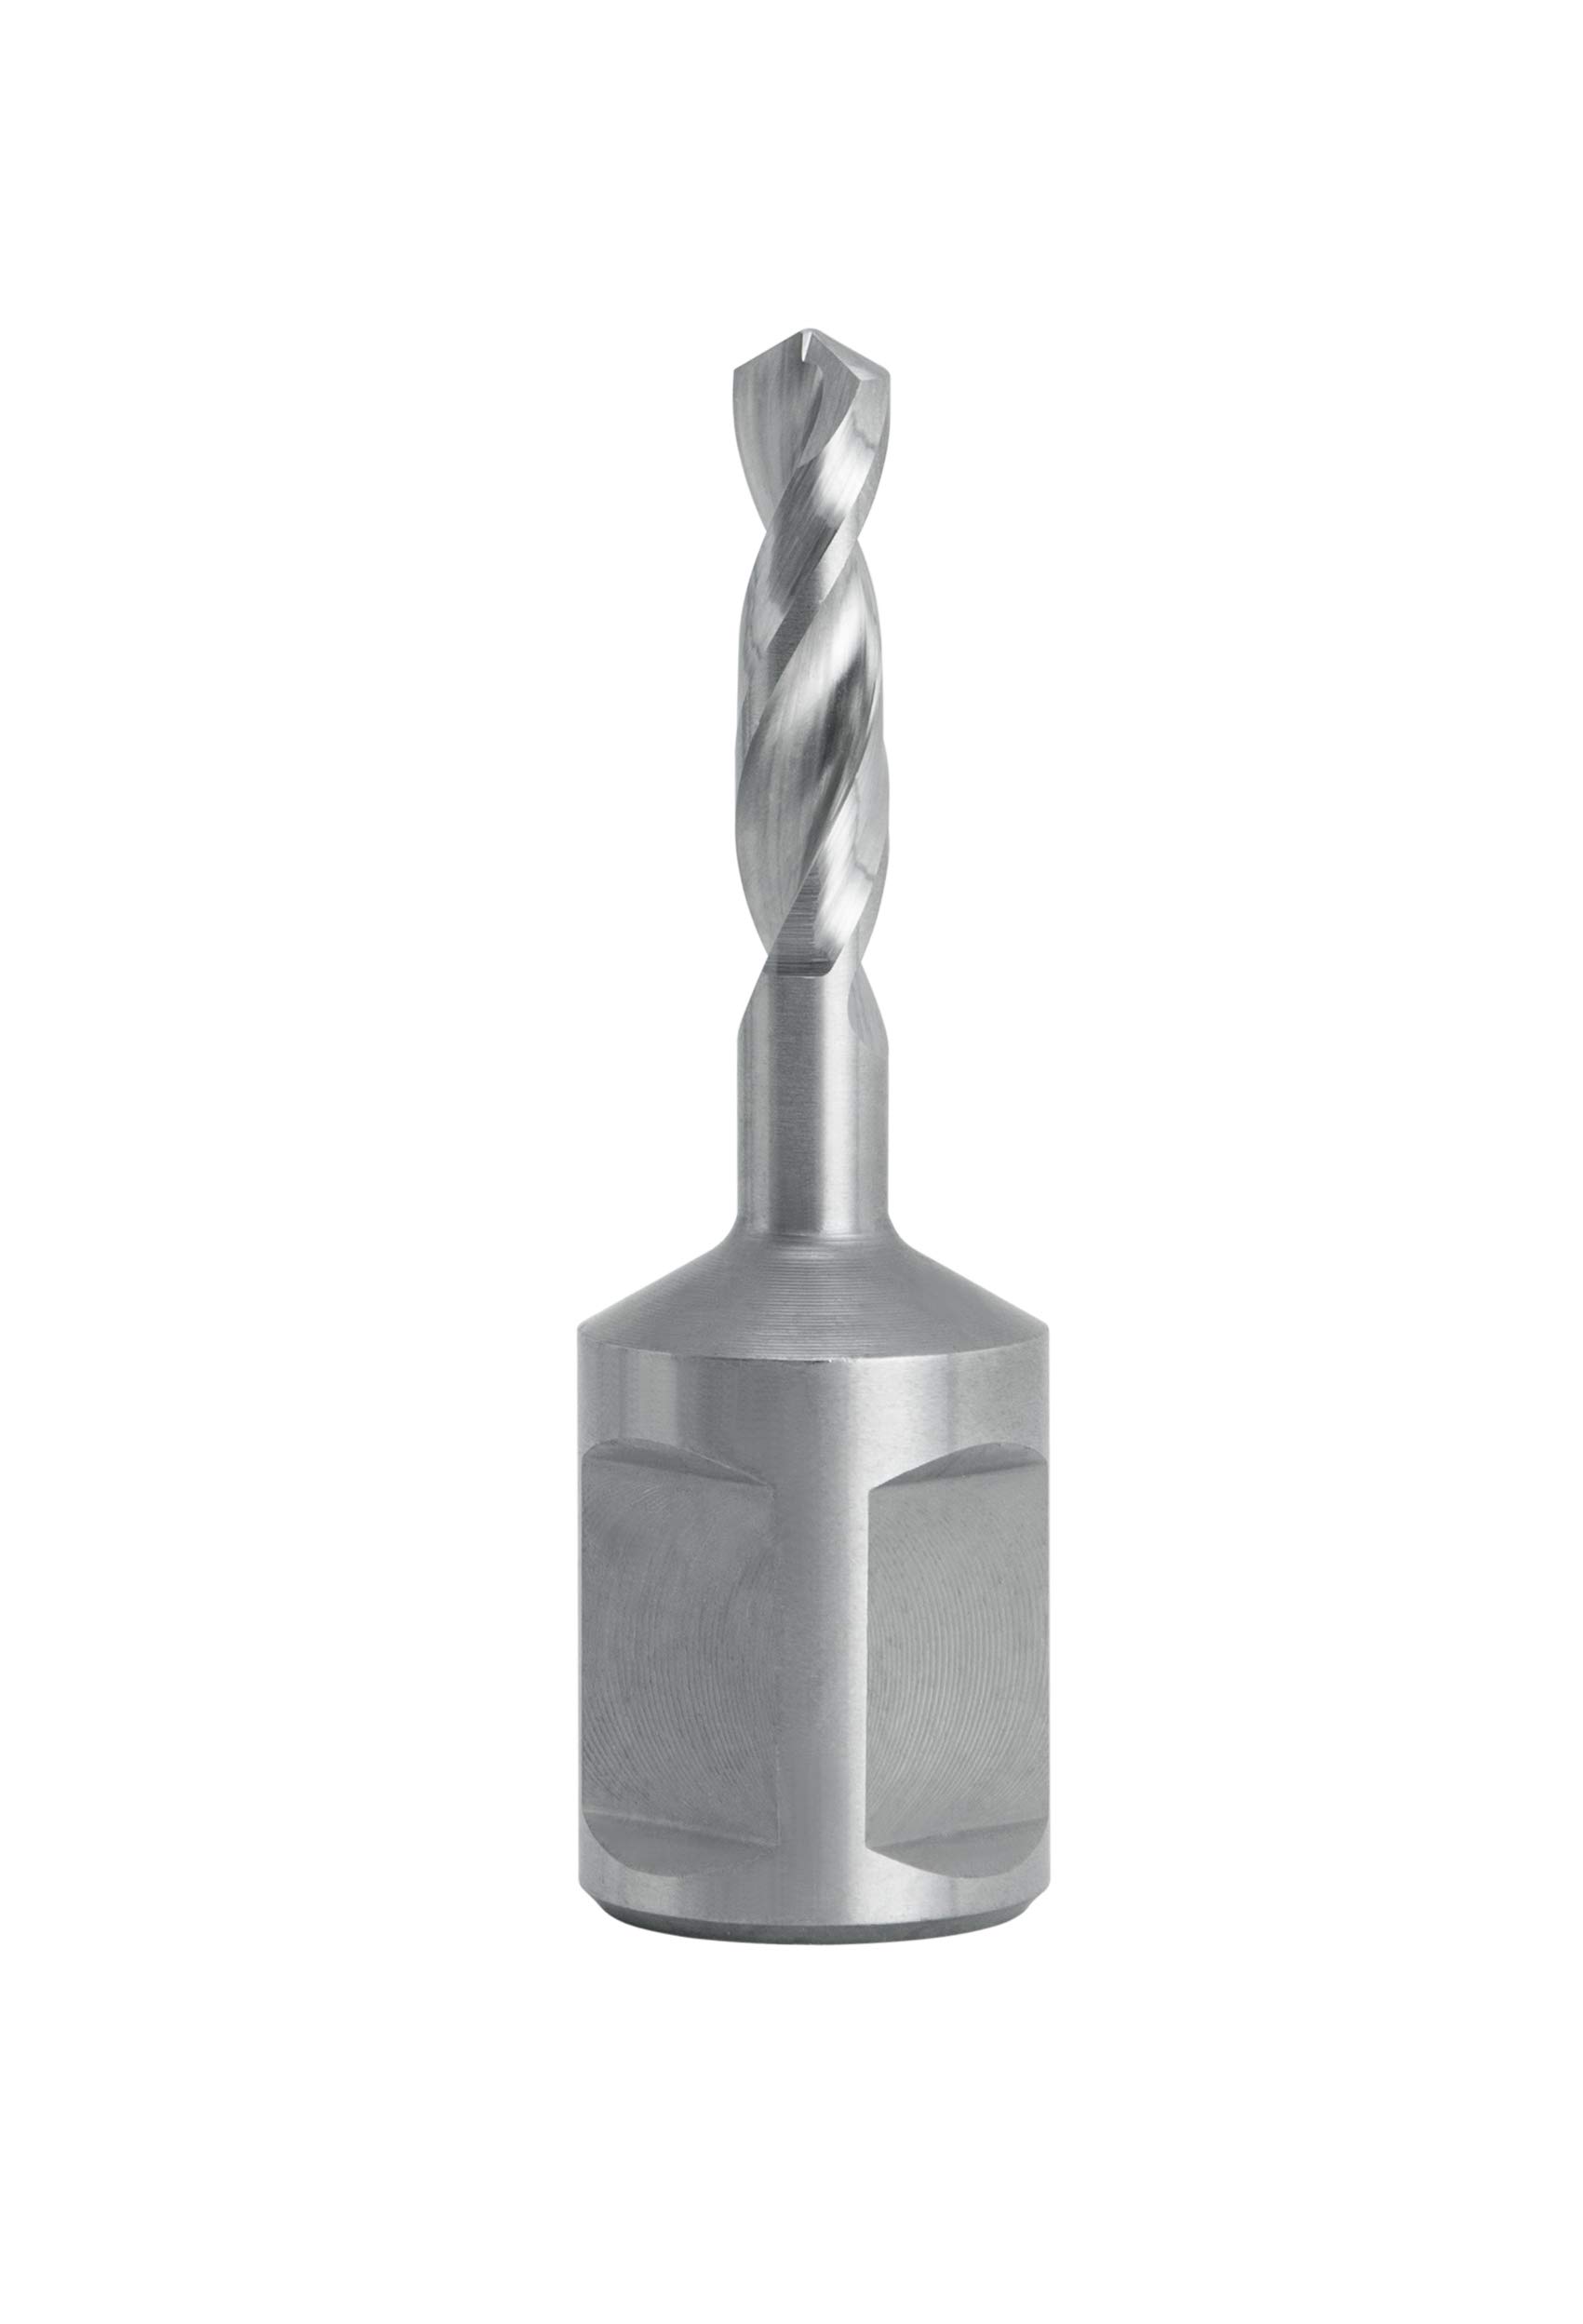 ACTOOL 1/4'' Diameter x 1'' Depth of Cut HSS Solid Drill with 3/4'' Weldon Shank,HSS Fully Ground Drill